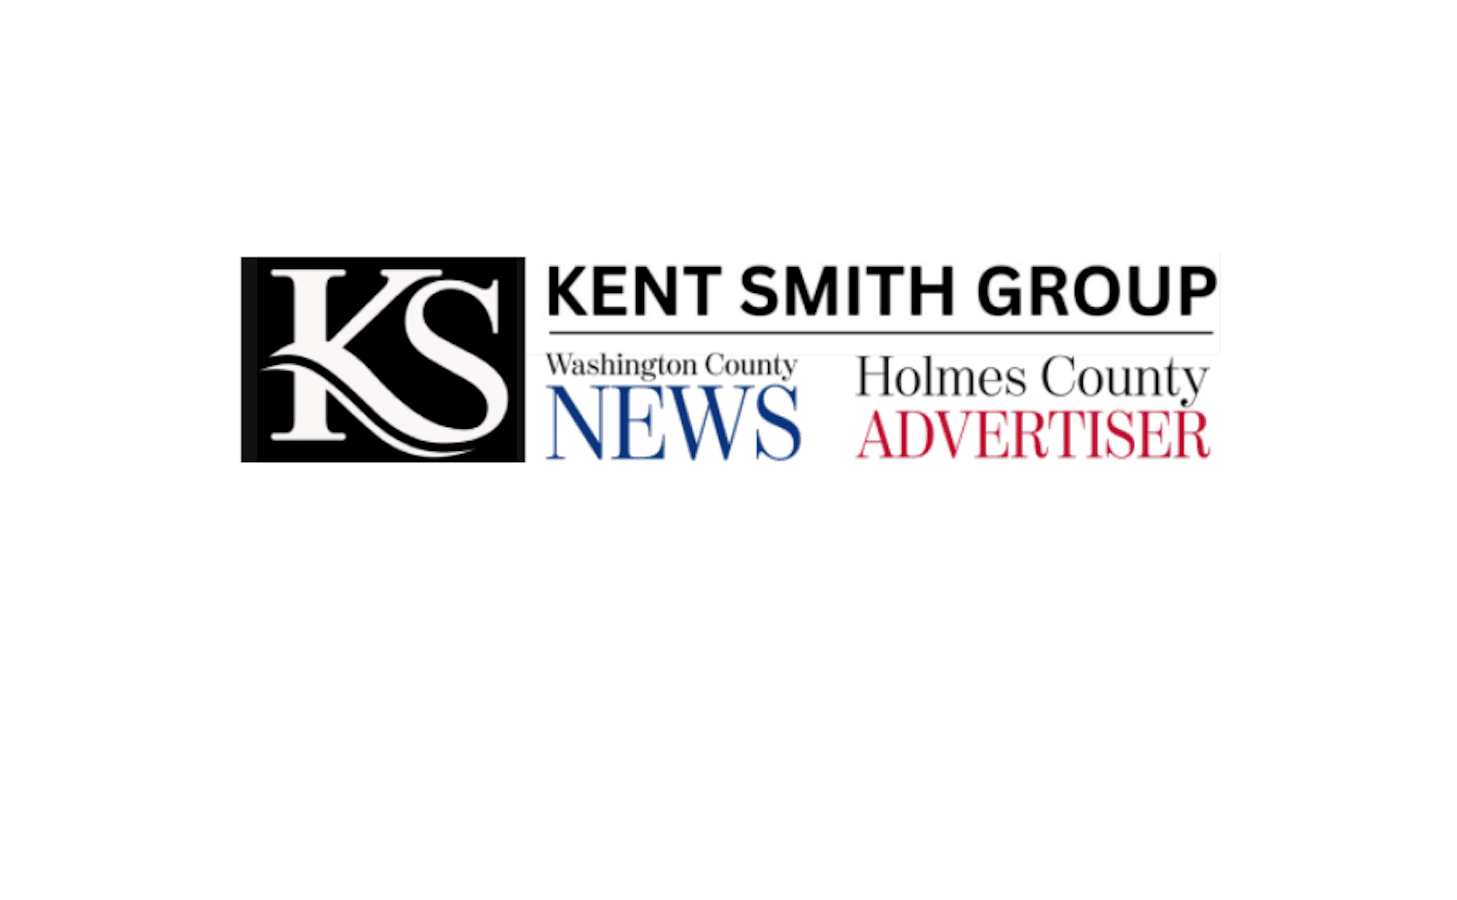 A logo of the kent smith group and news.